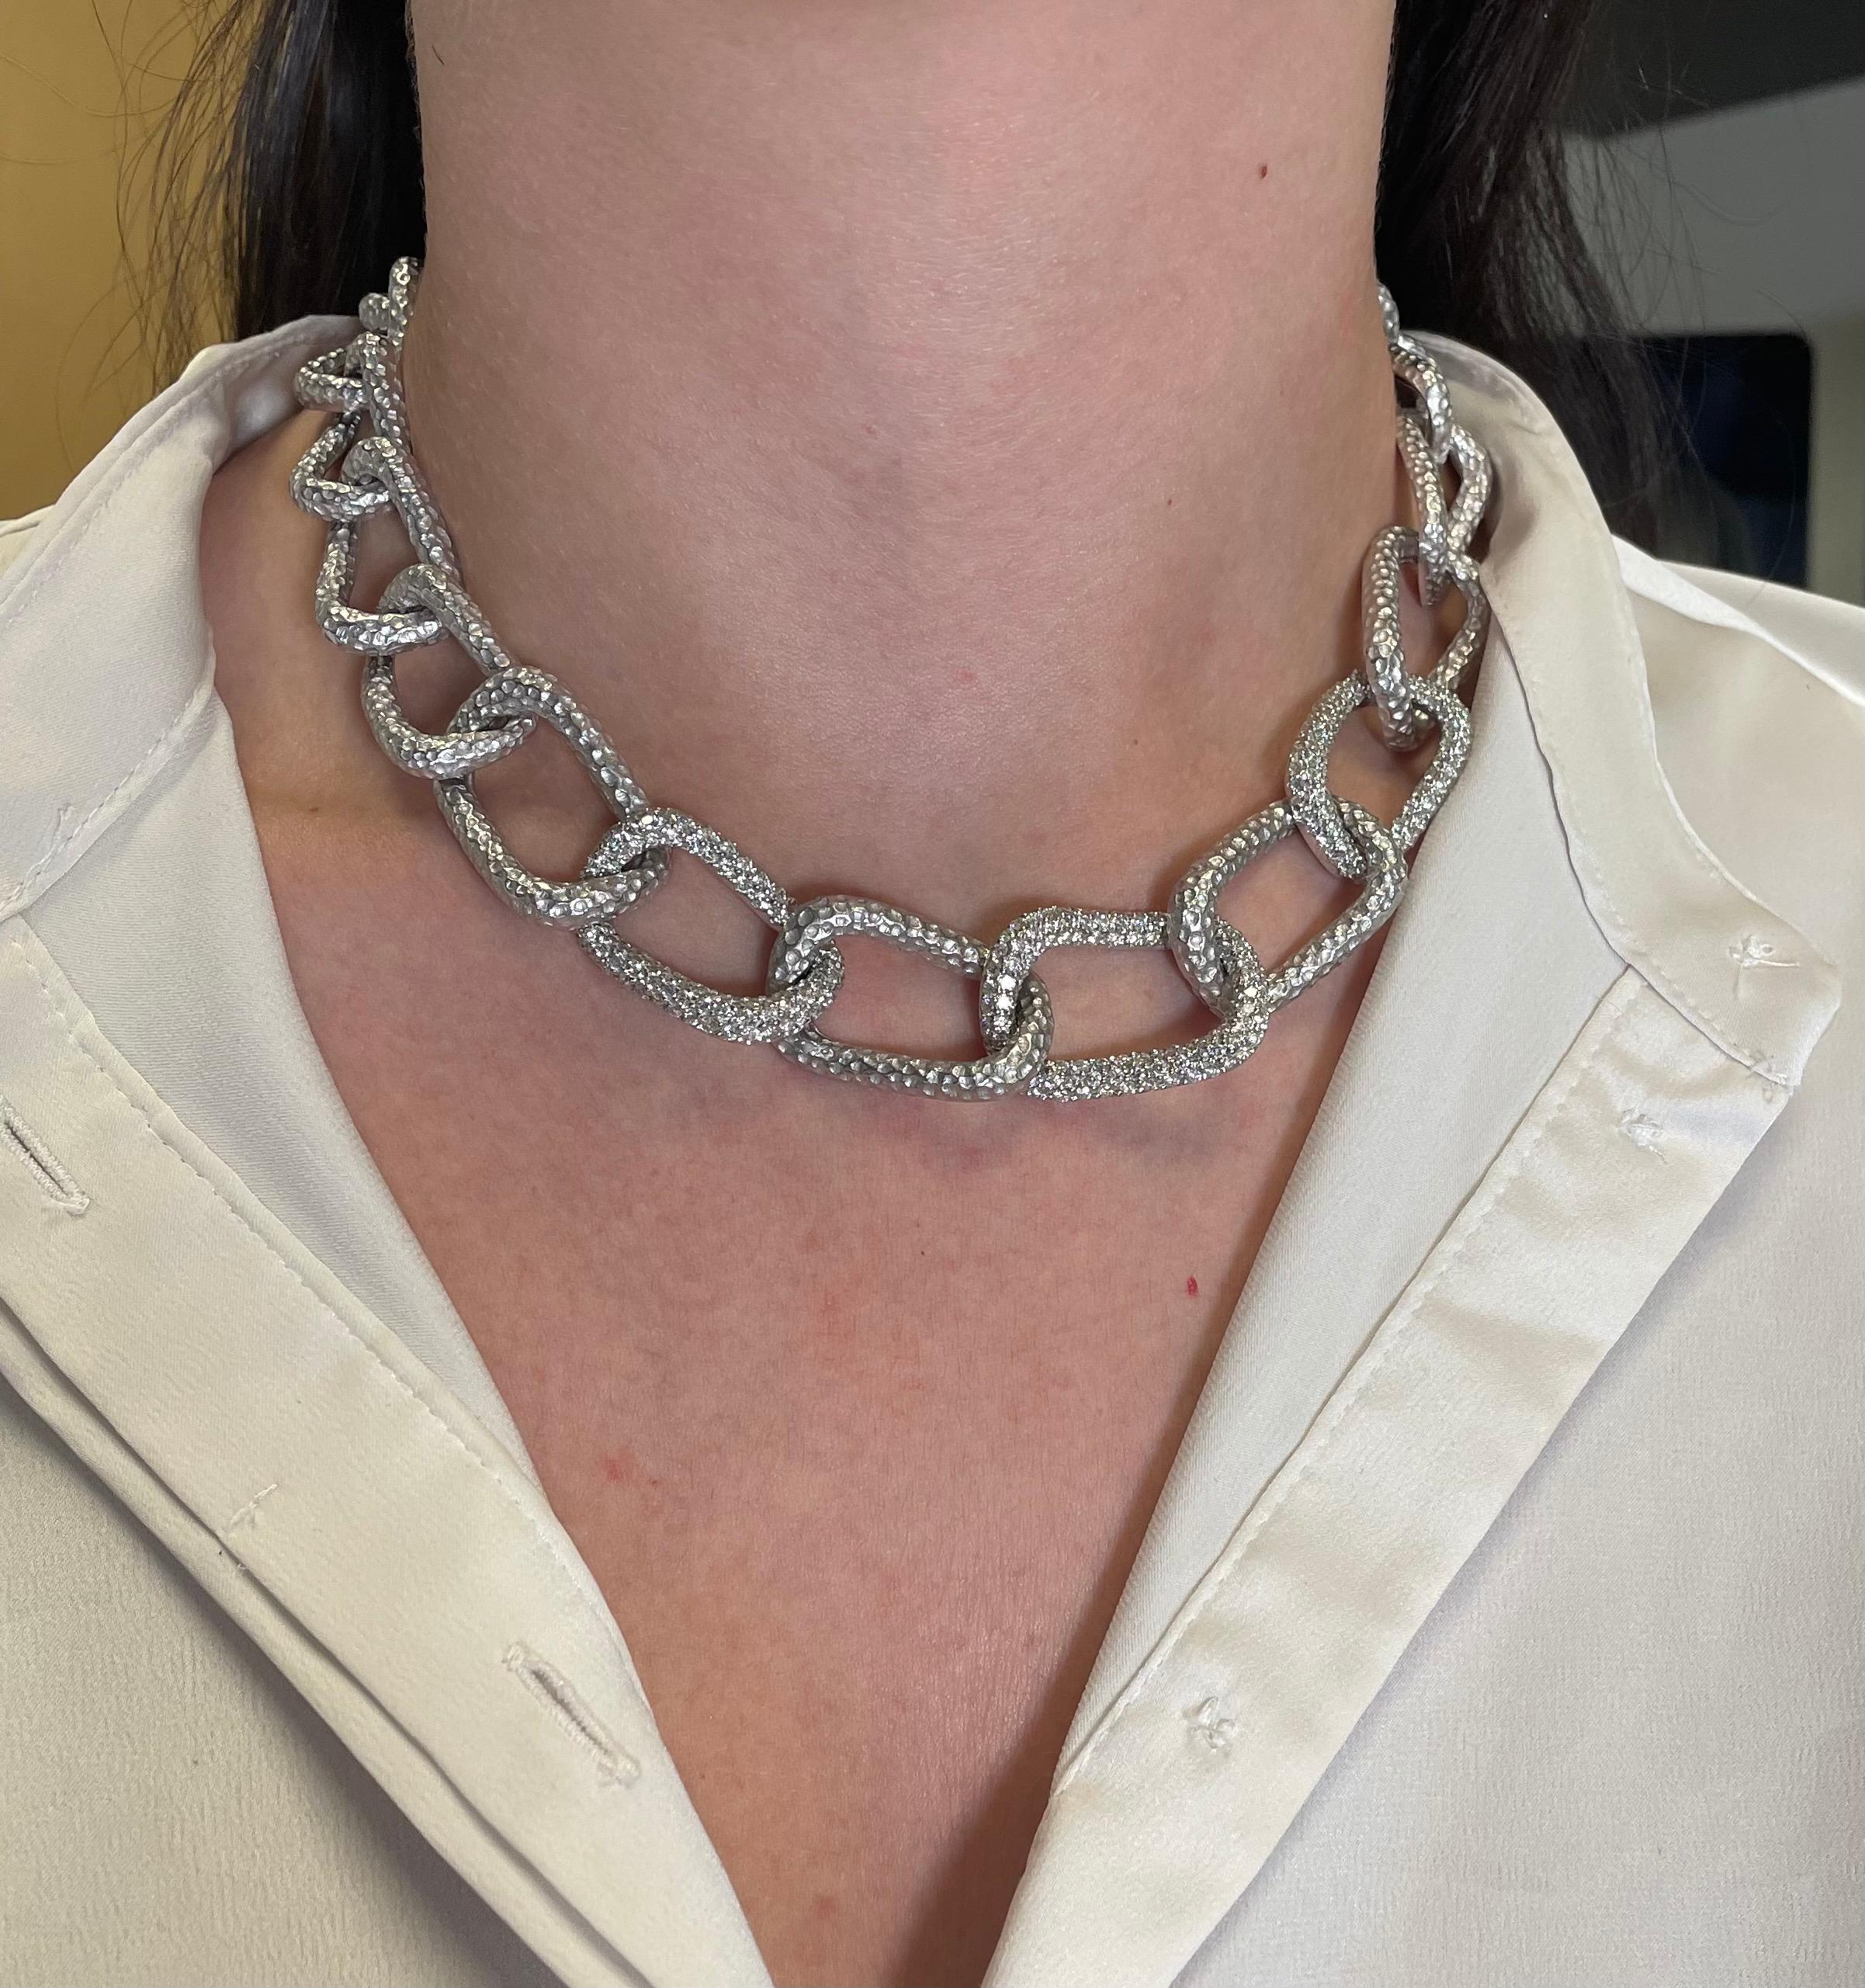 Grand diamond chain necklace. Every other link with pave set diamonds and every other link hammer finished.
8.20 carats of round brilliant diamonds, approximately G/H color and SI clarity. 18-karat white gold,  18in
Accommodated with an up to date